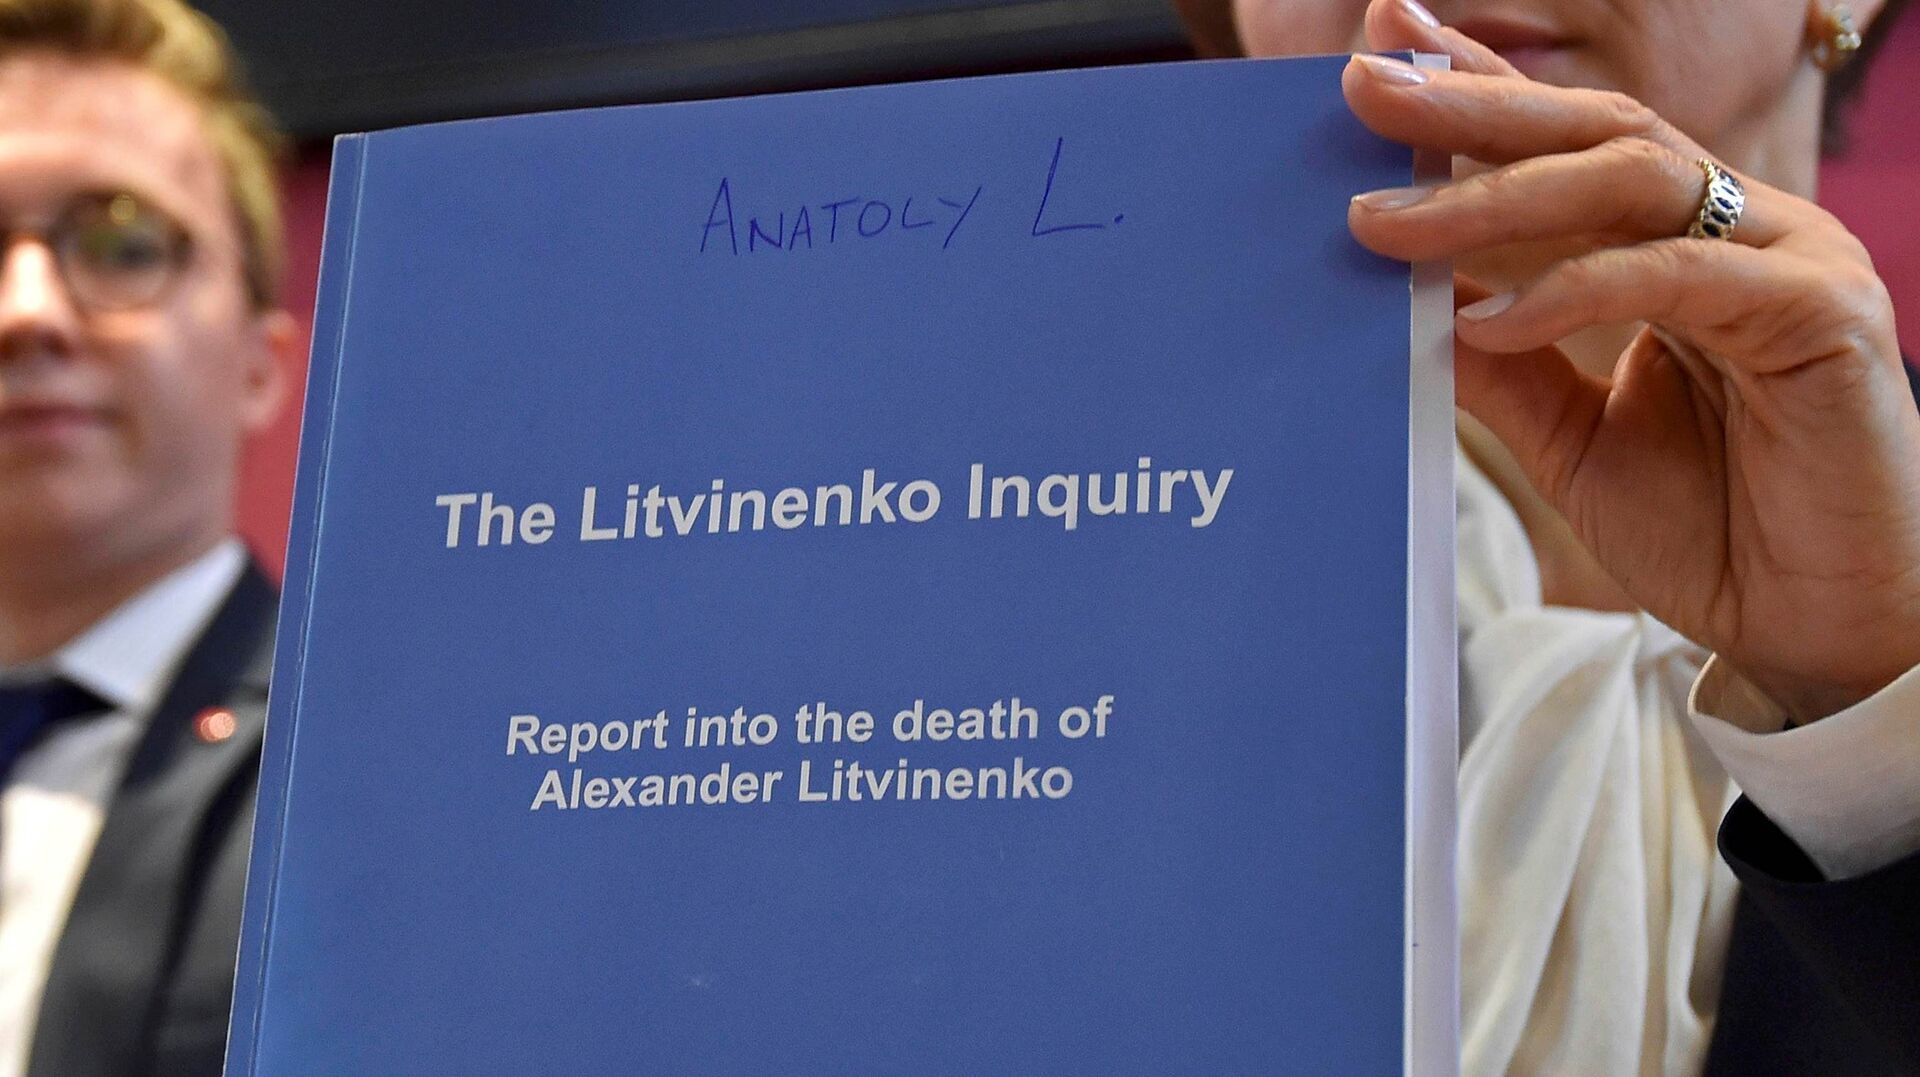 Marina Litvinenko, (R) widow of  Alexander Litvinenko, poses with a copy of The Litvinenko Inquiry Report with her son Anatoly (L) during a news conference in London, Britain, January 21, 2016.  - Sputnik International, 1920, 21.09.2021